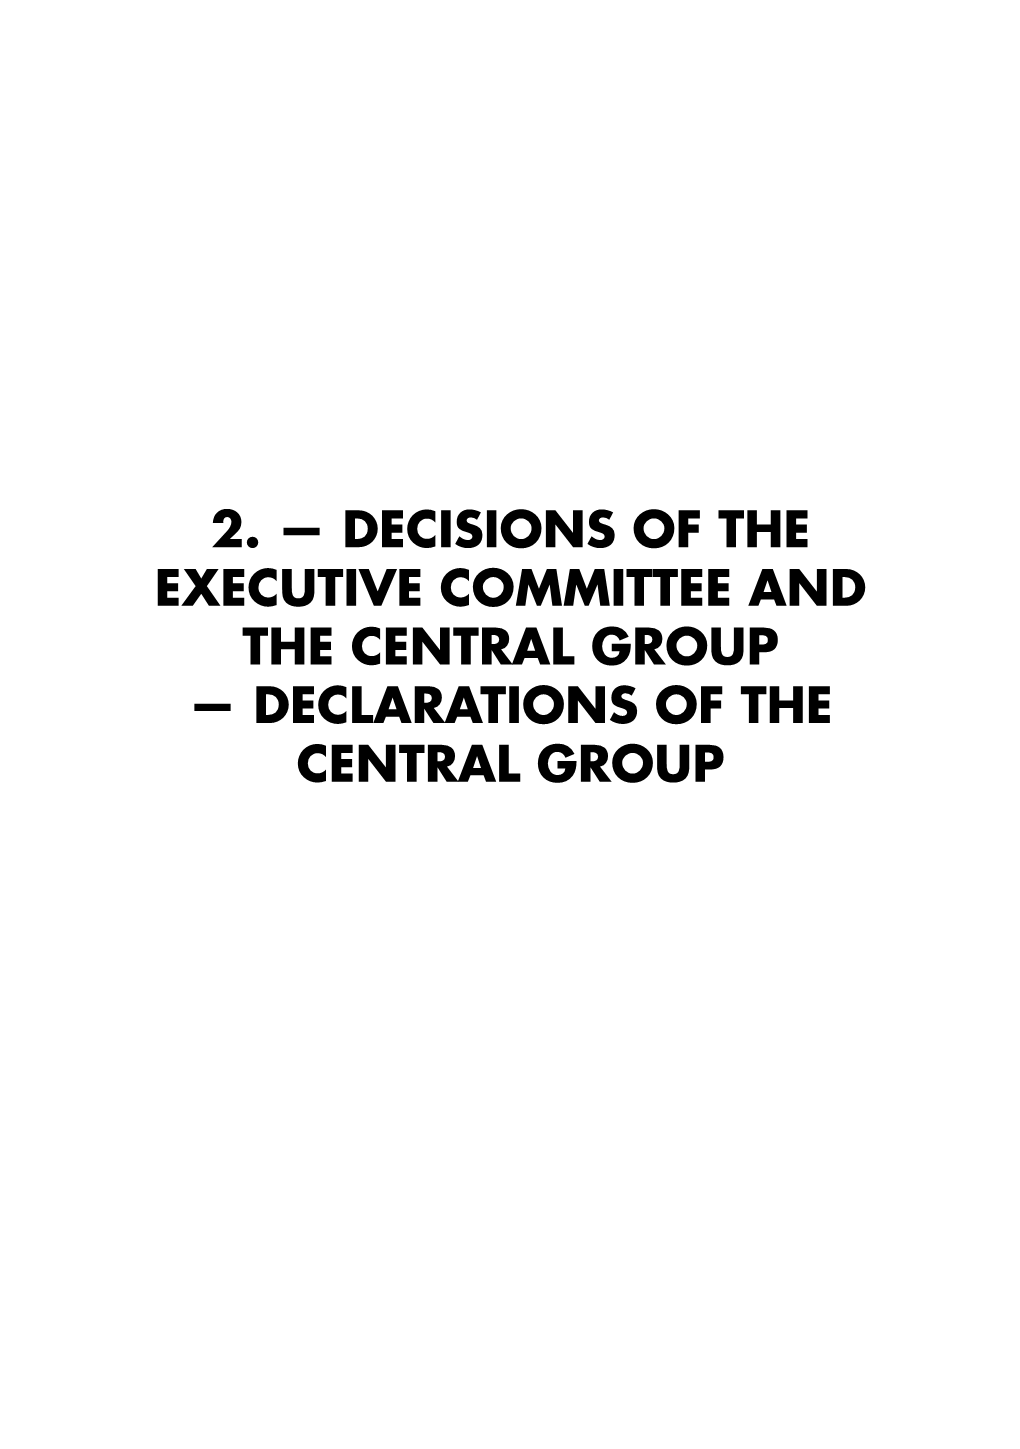 Decisions of the Executive Committee and the Central Group — Declarations of the Central Group